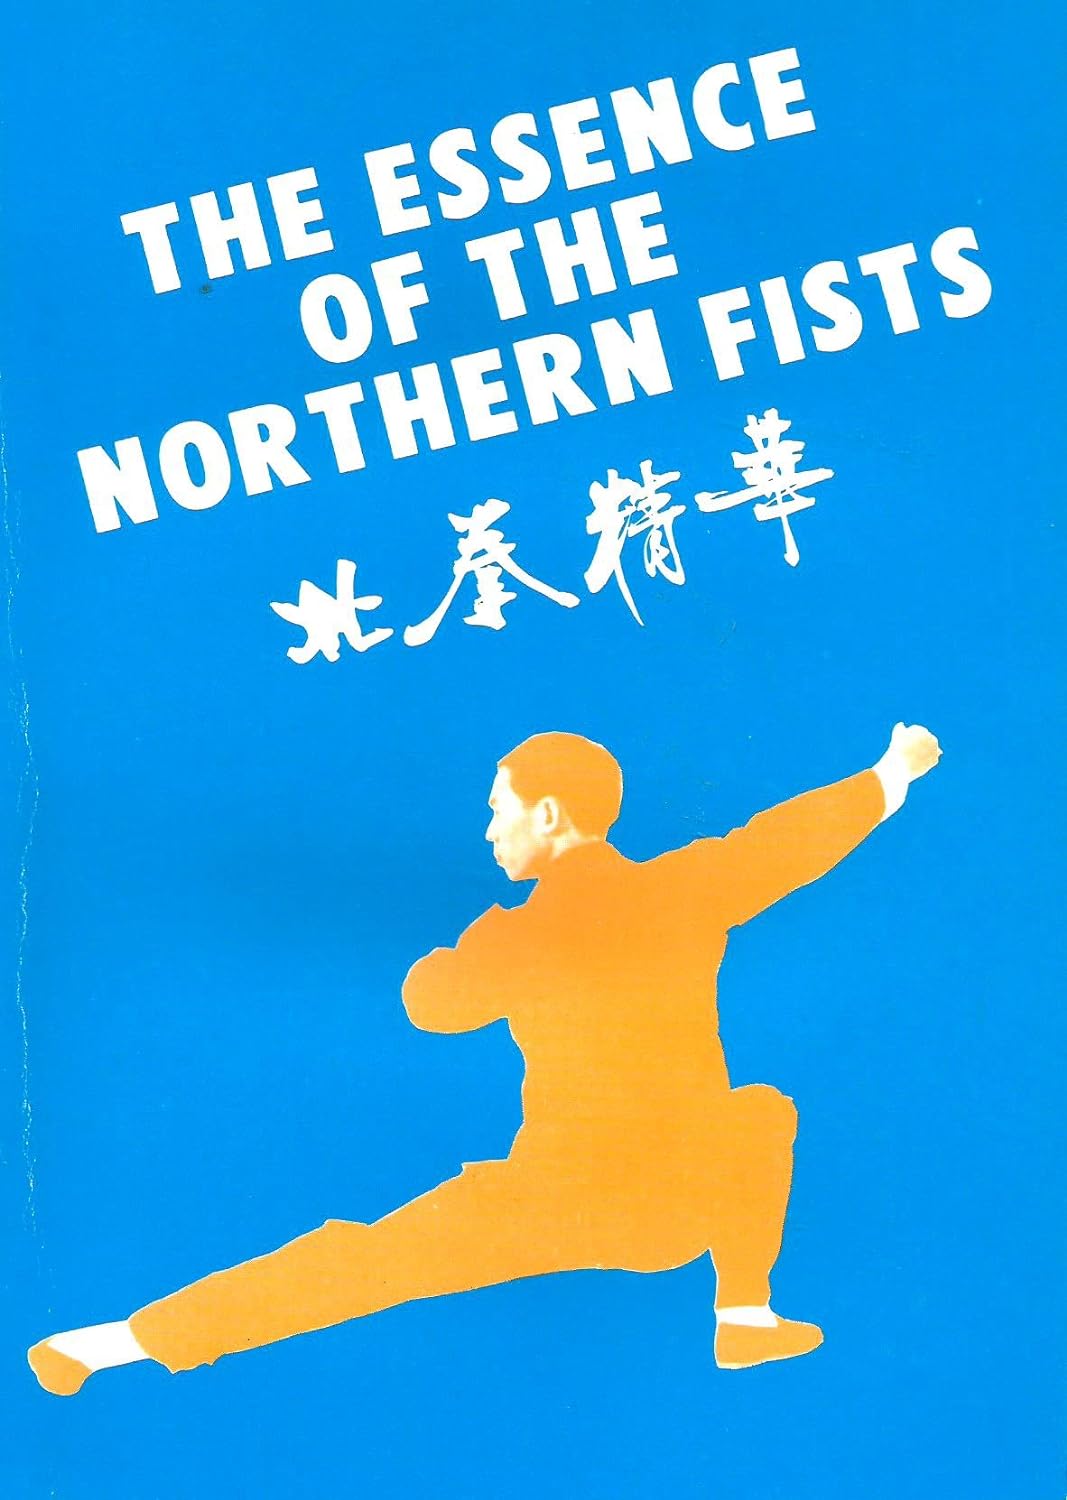 The Essence of the Northern Fists Book by Douglas Hsieh